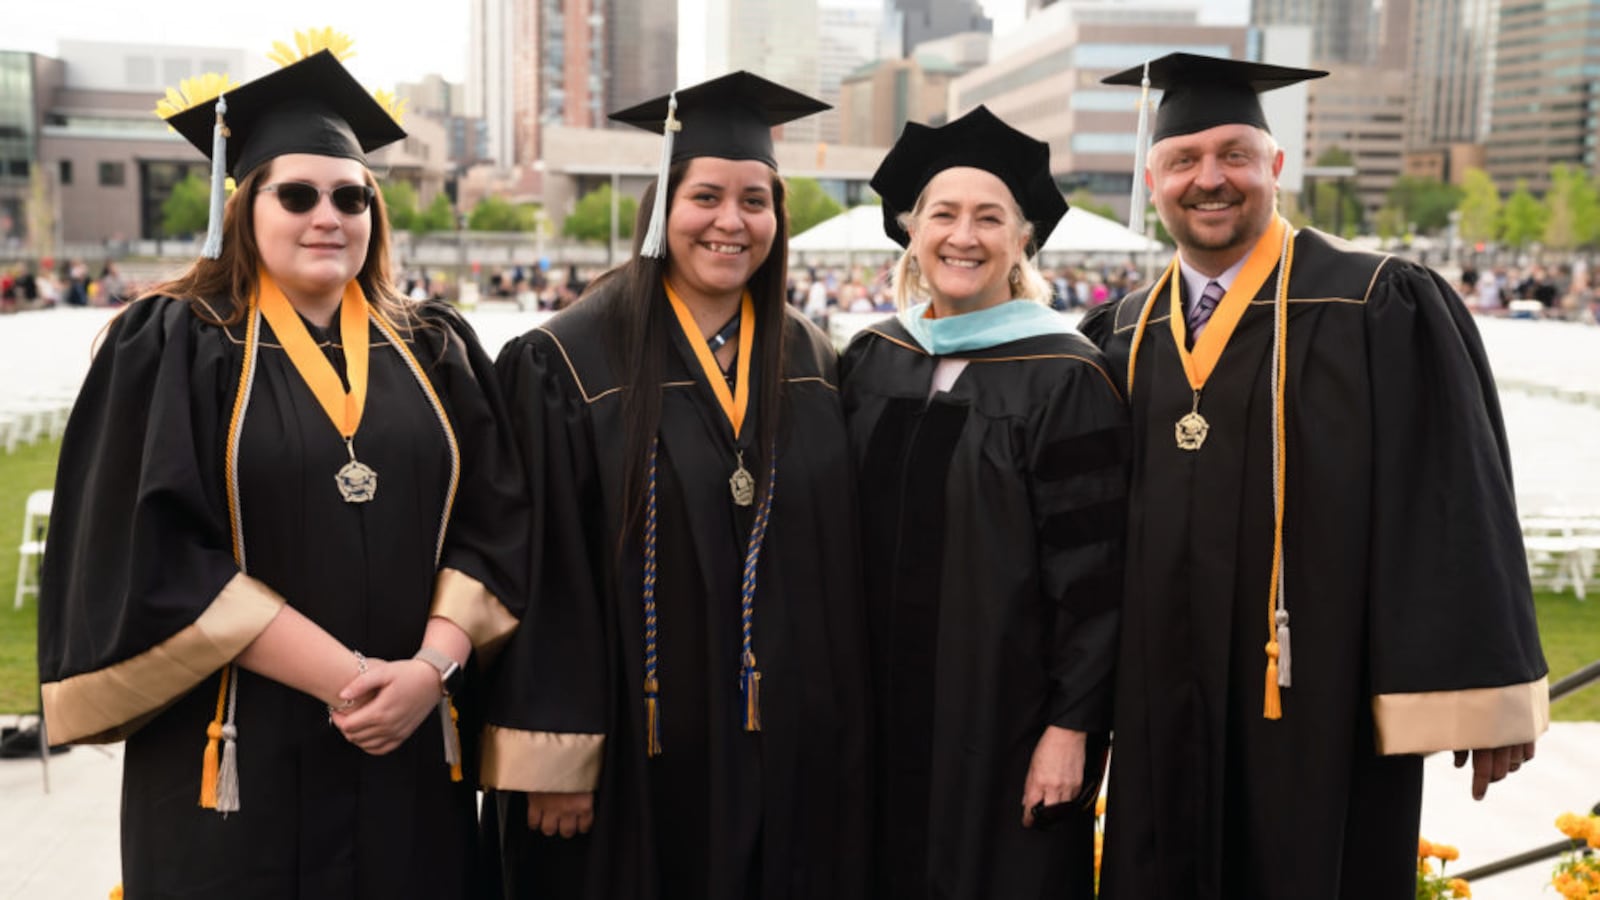 Brooke Waring, left, NaTasha Montoya, and James Osborn are the first graduates of a University of Colorado Denver partnership with Otero Junior College. At commencement, they posed with Associate Dean Barbara Seidl.